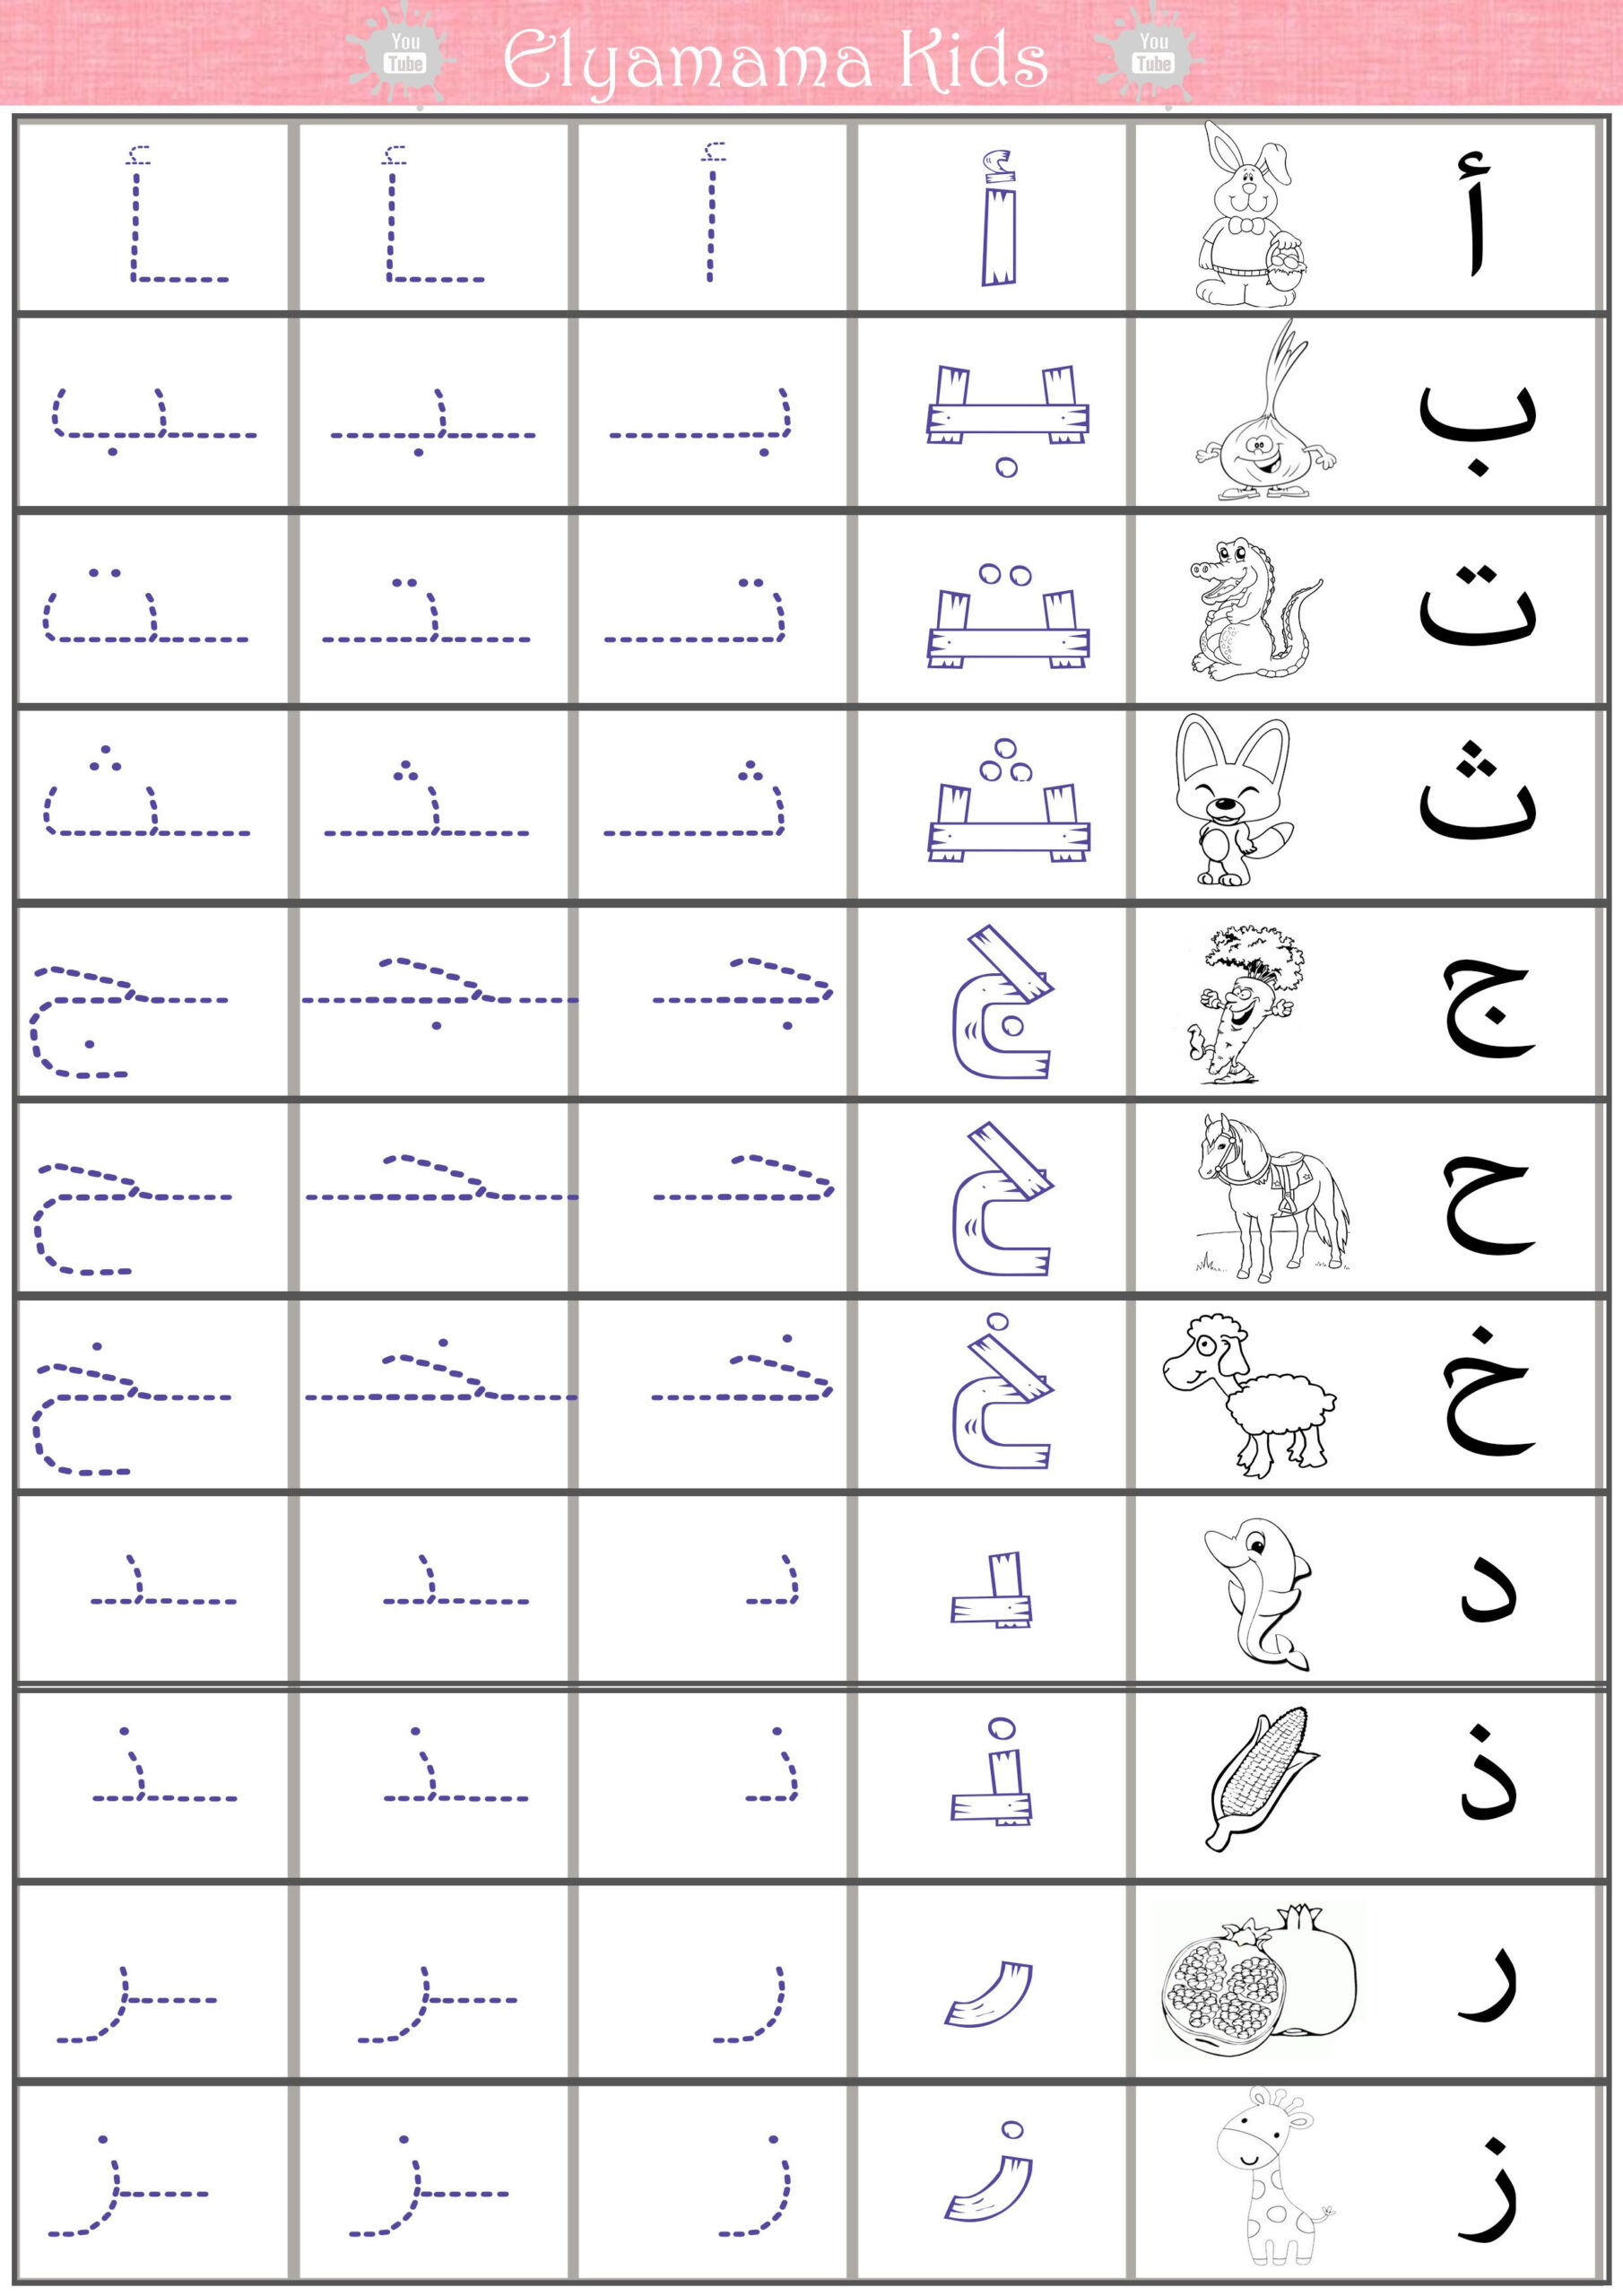 Arabic Alphabet Worksheets Printable Pdf Learning How To Read